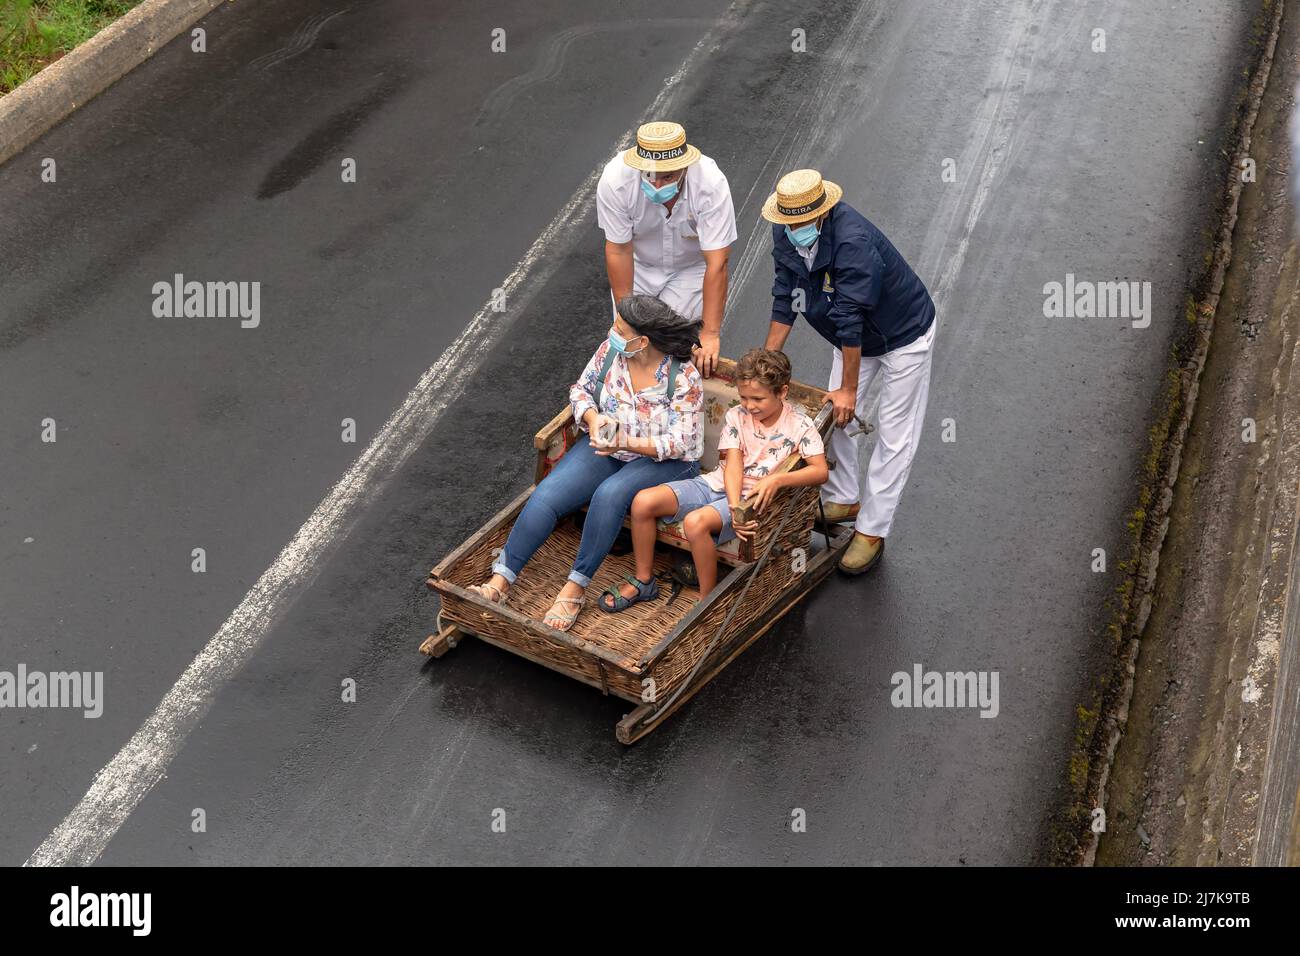 FUNCHAL, PORTUGAL - AUGUST 24, 2021: Unidentified woman and child roll down the street in wicker baskets (toboggans) with the help of drivers. Stock Photo